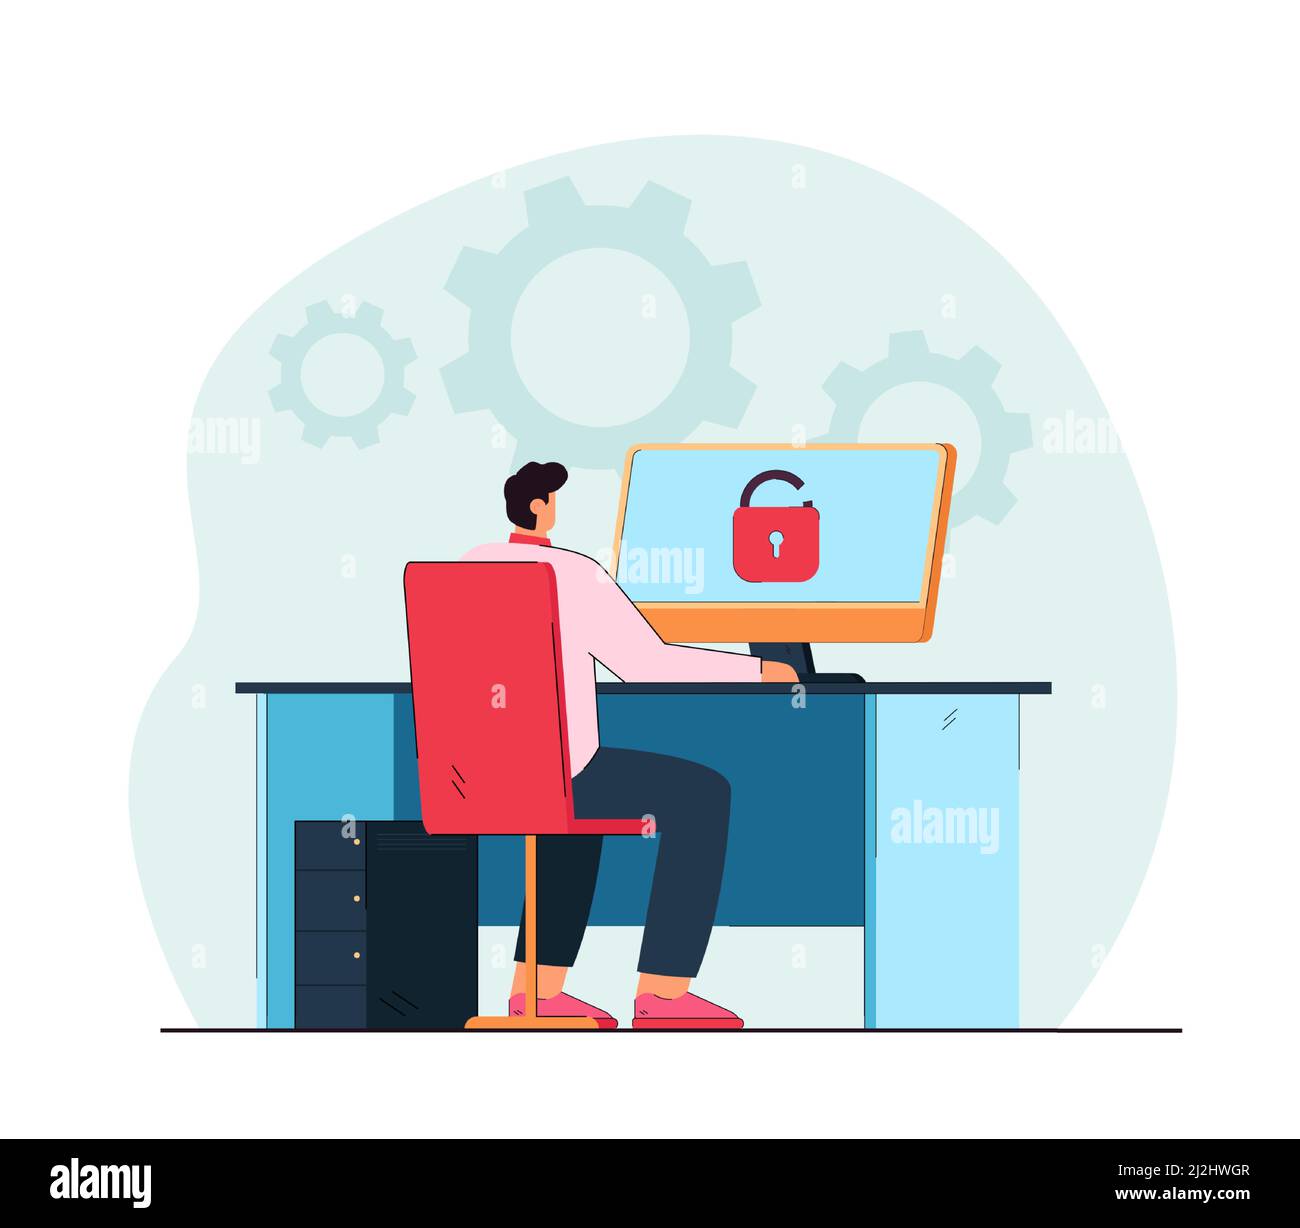 Man sitting at desk and unlocking computer. Computer settings, login flat vector illustration. Modern technologies, personal data protection concept f Stock Vector